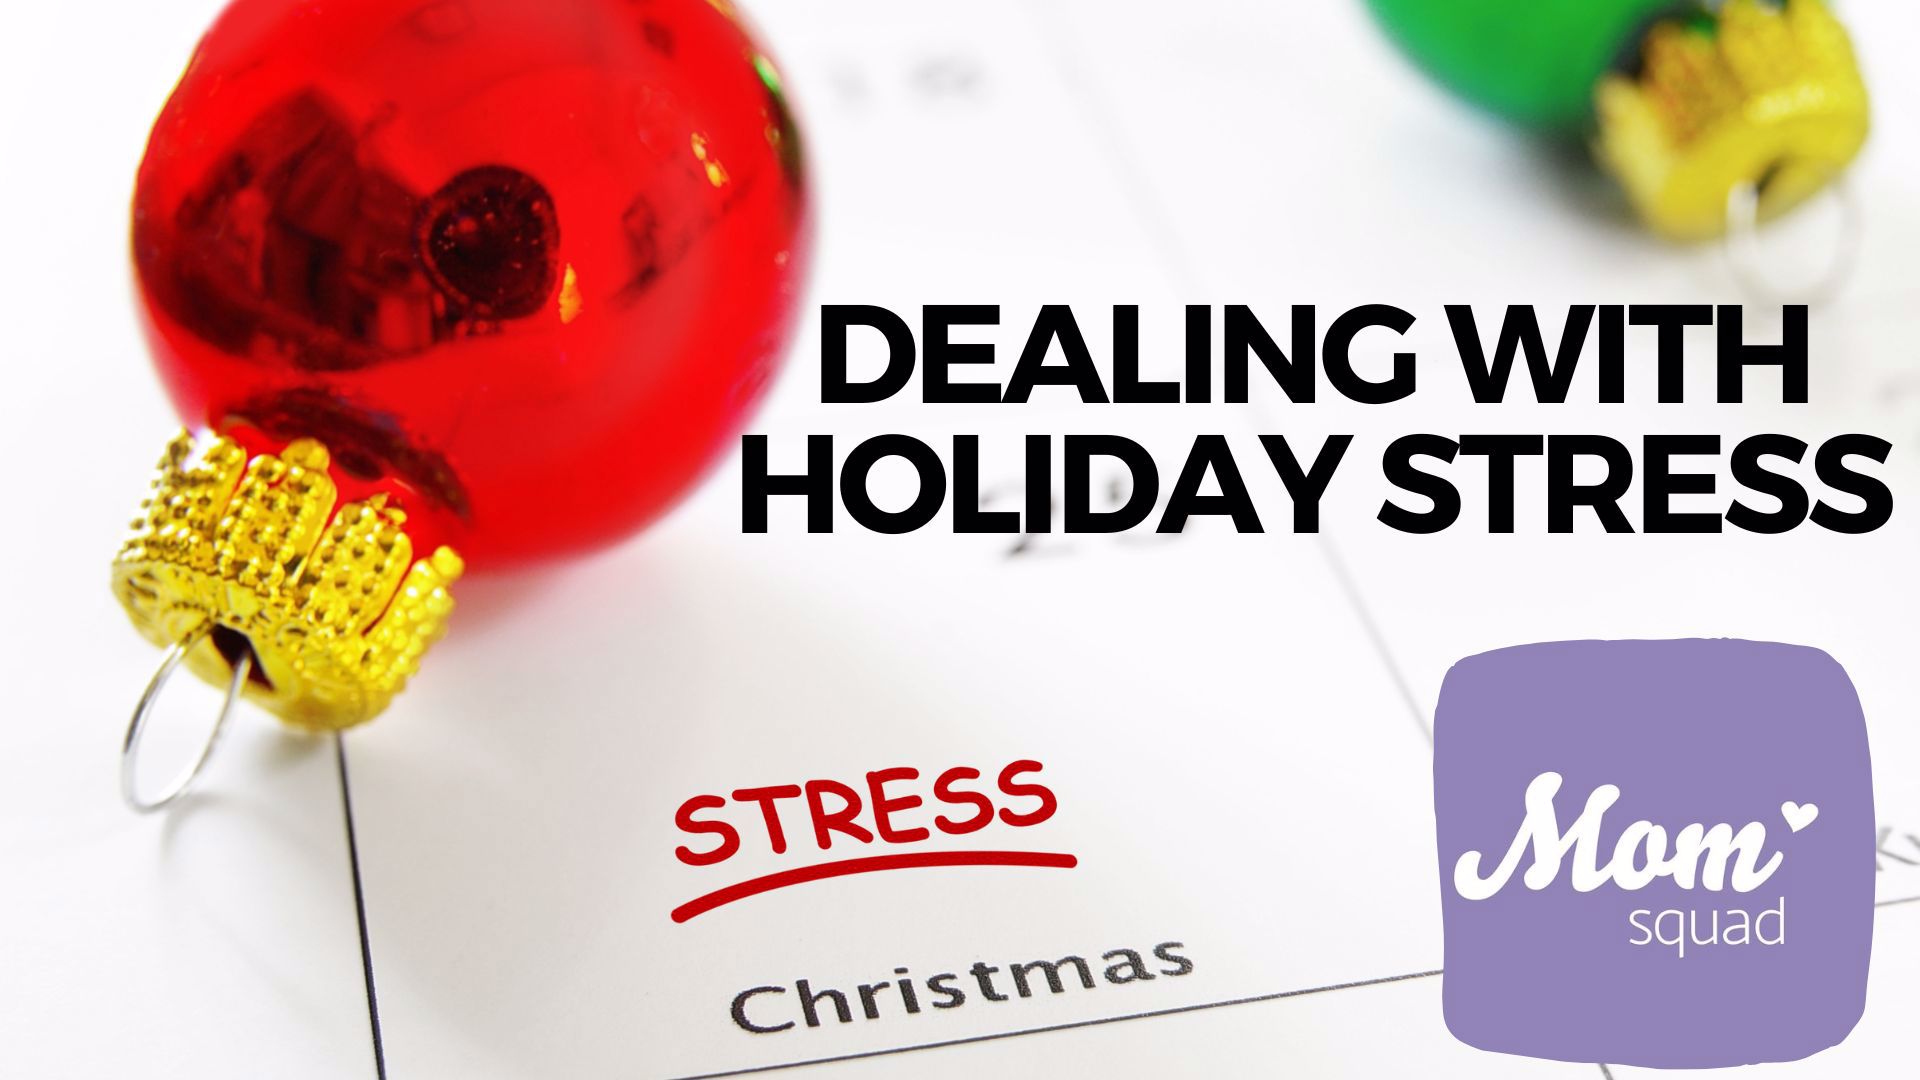 WKYC's Maureen Kyle sits down with a fellow mom to talk holiday stressors. She also speaks with a clinical psychologist about how to handle the stress.